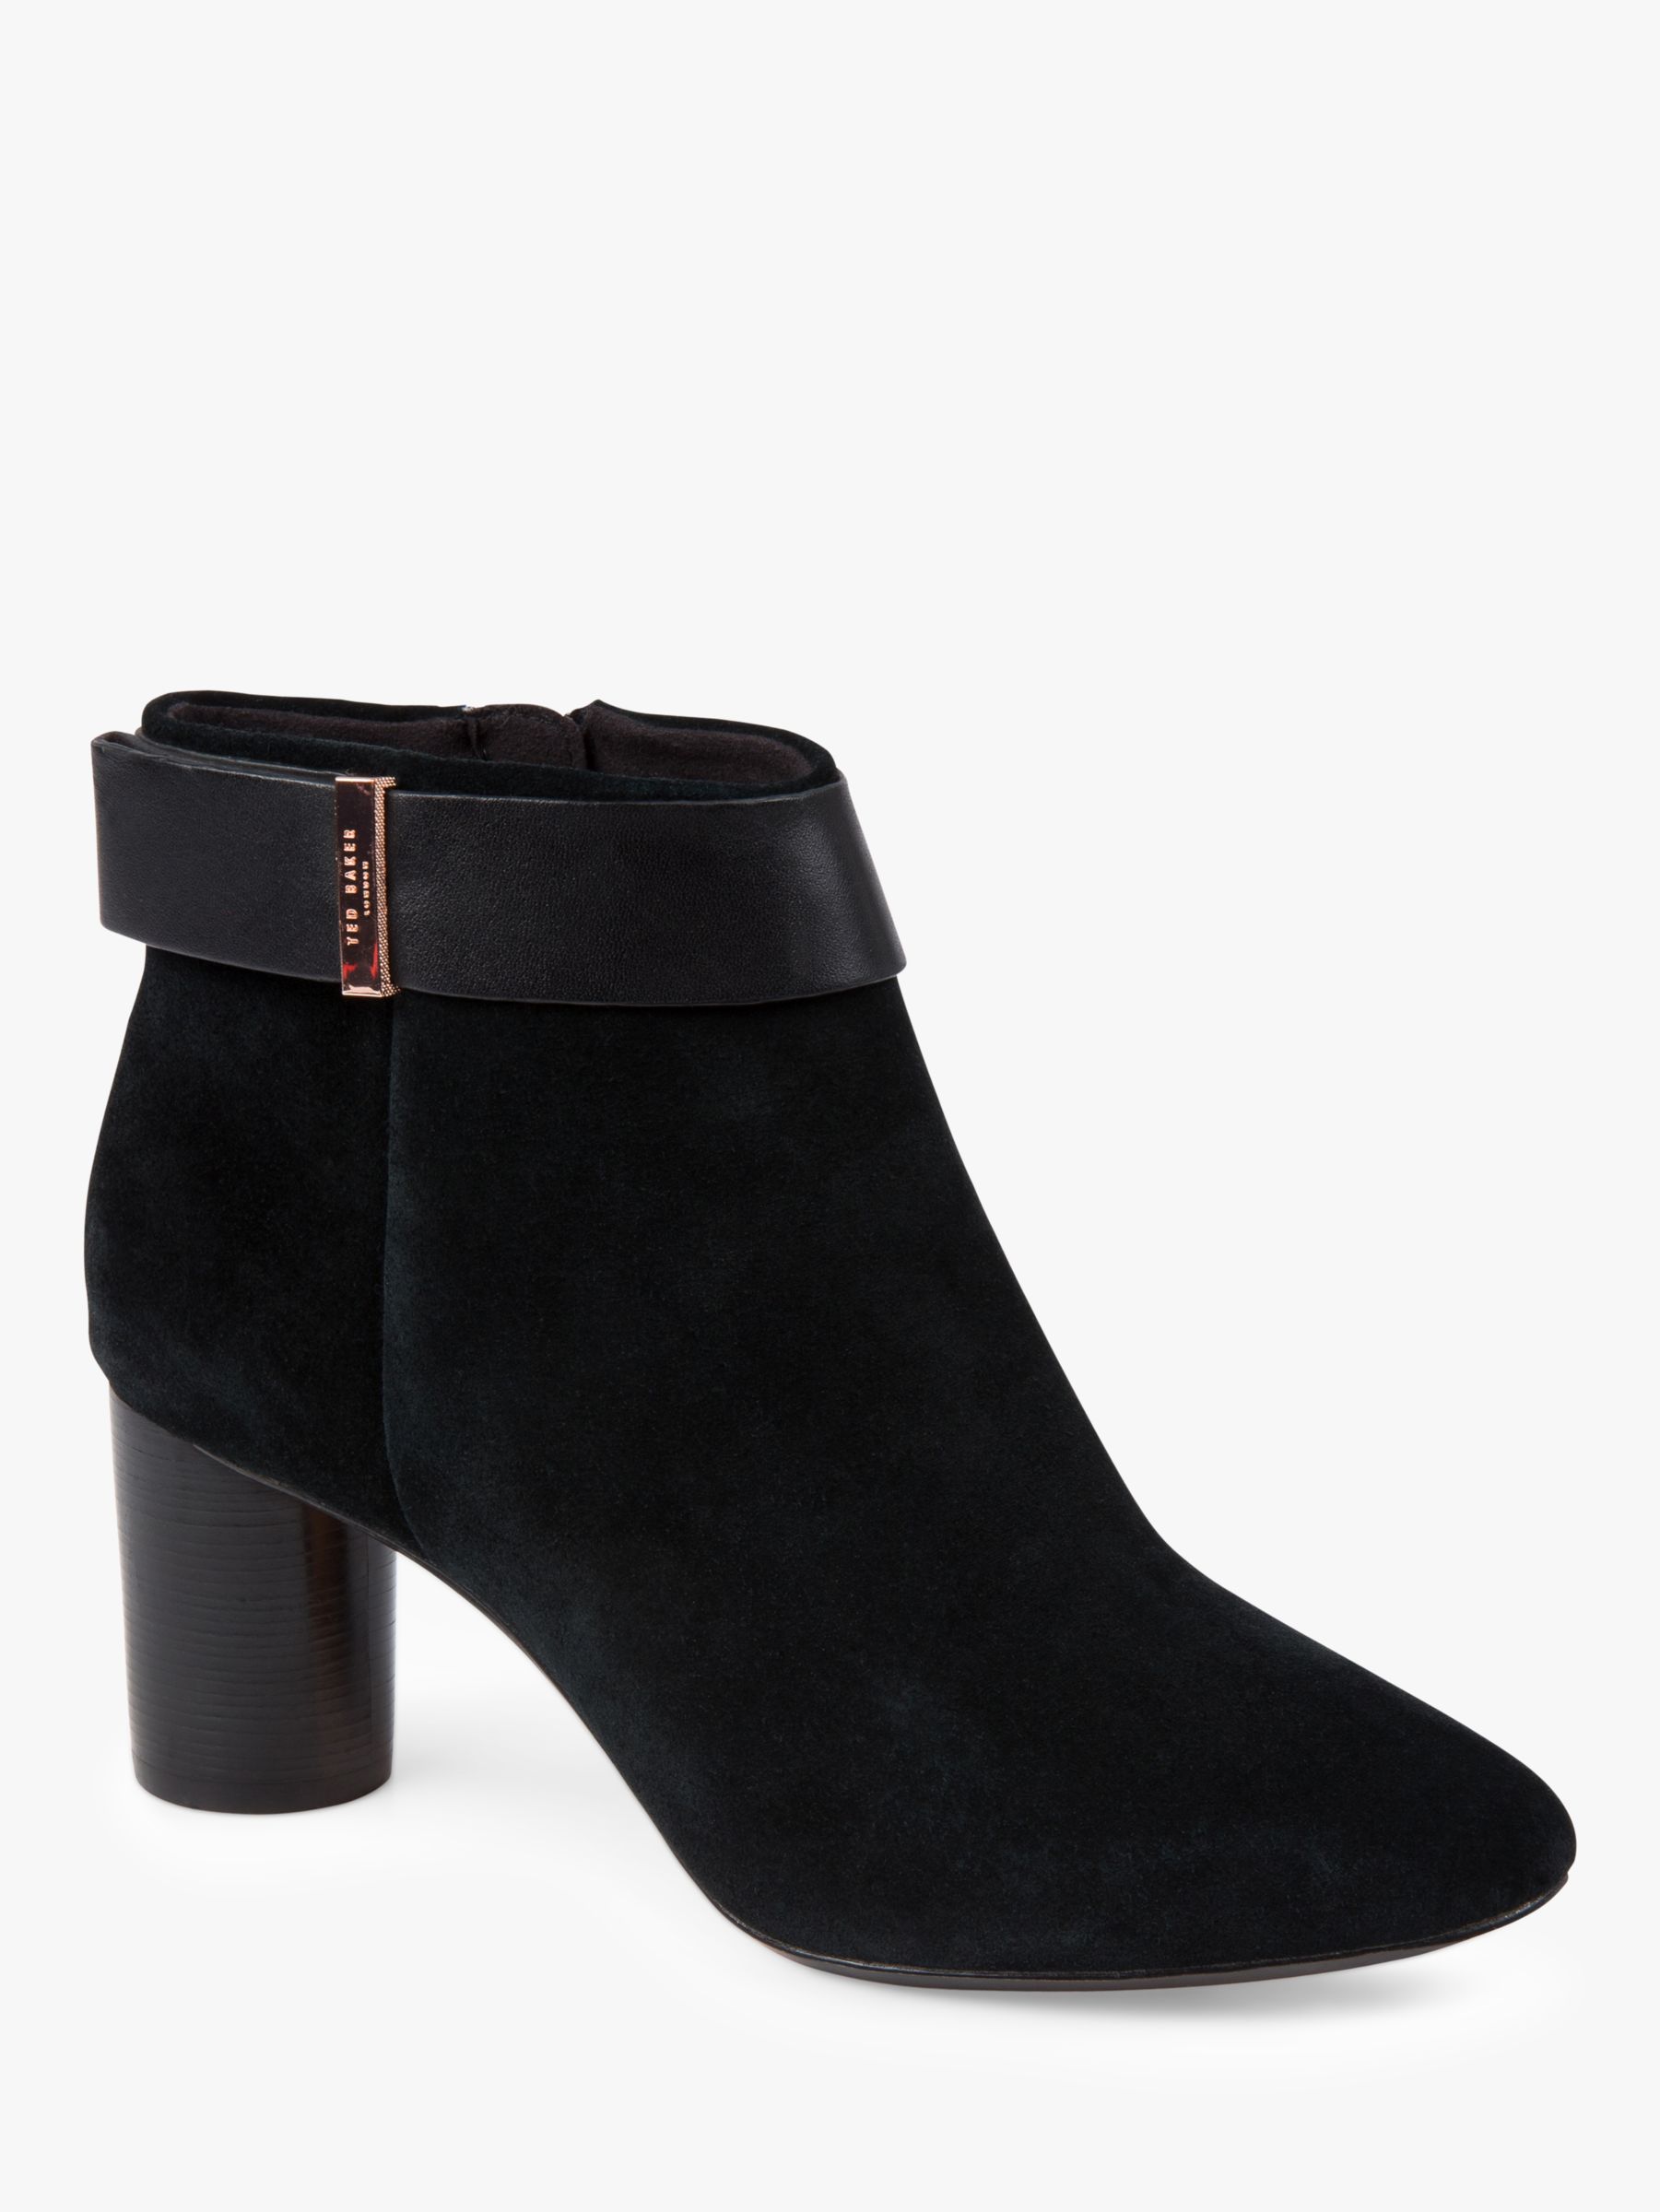 Ted Baker Mharia Suede Block Heel Ankle Boots | Black at John Lewis ...